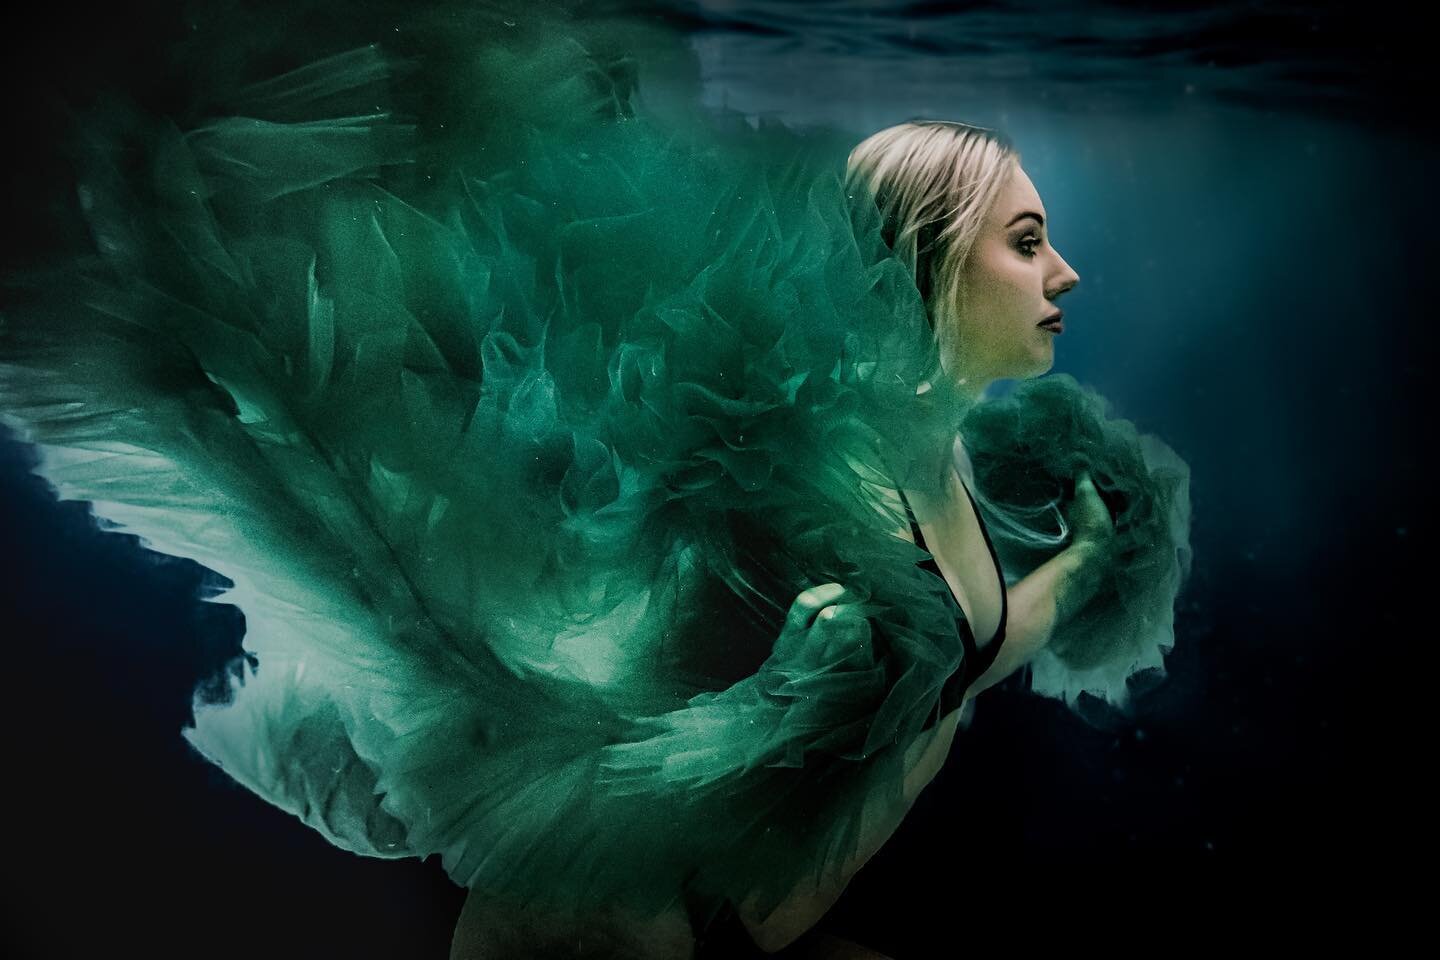 ART!

This is EPIC!🔥 @demilankesterpt 

Underwater styled concept shoots register your interest in the link in our bio! 
.
.
.
.
📸 @lpfitness_photography 
💄 @katarina__makeupartist 
👗 @blkclawstyling 
📍 @riverside_hamptons_living